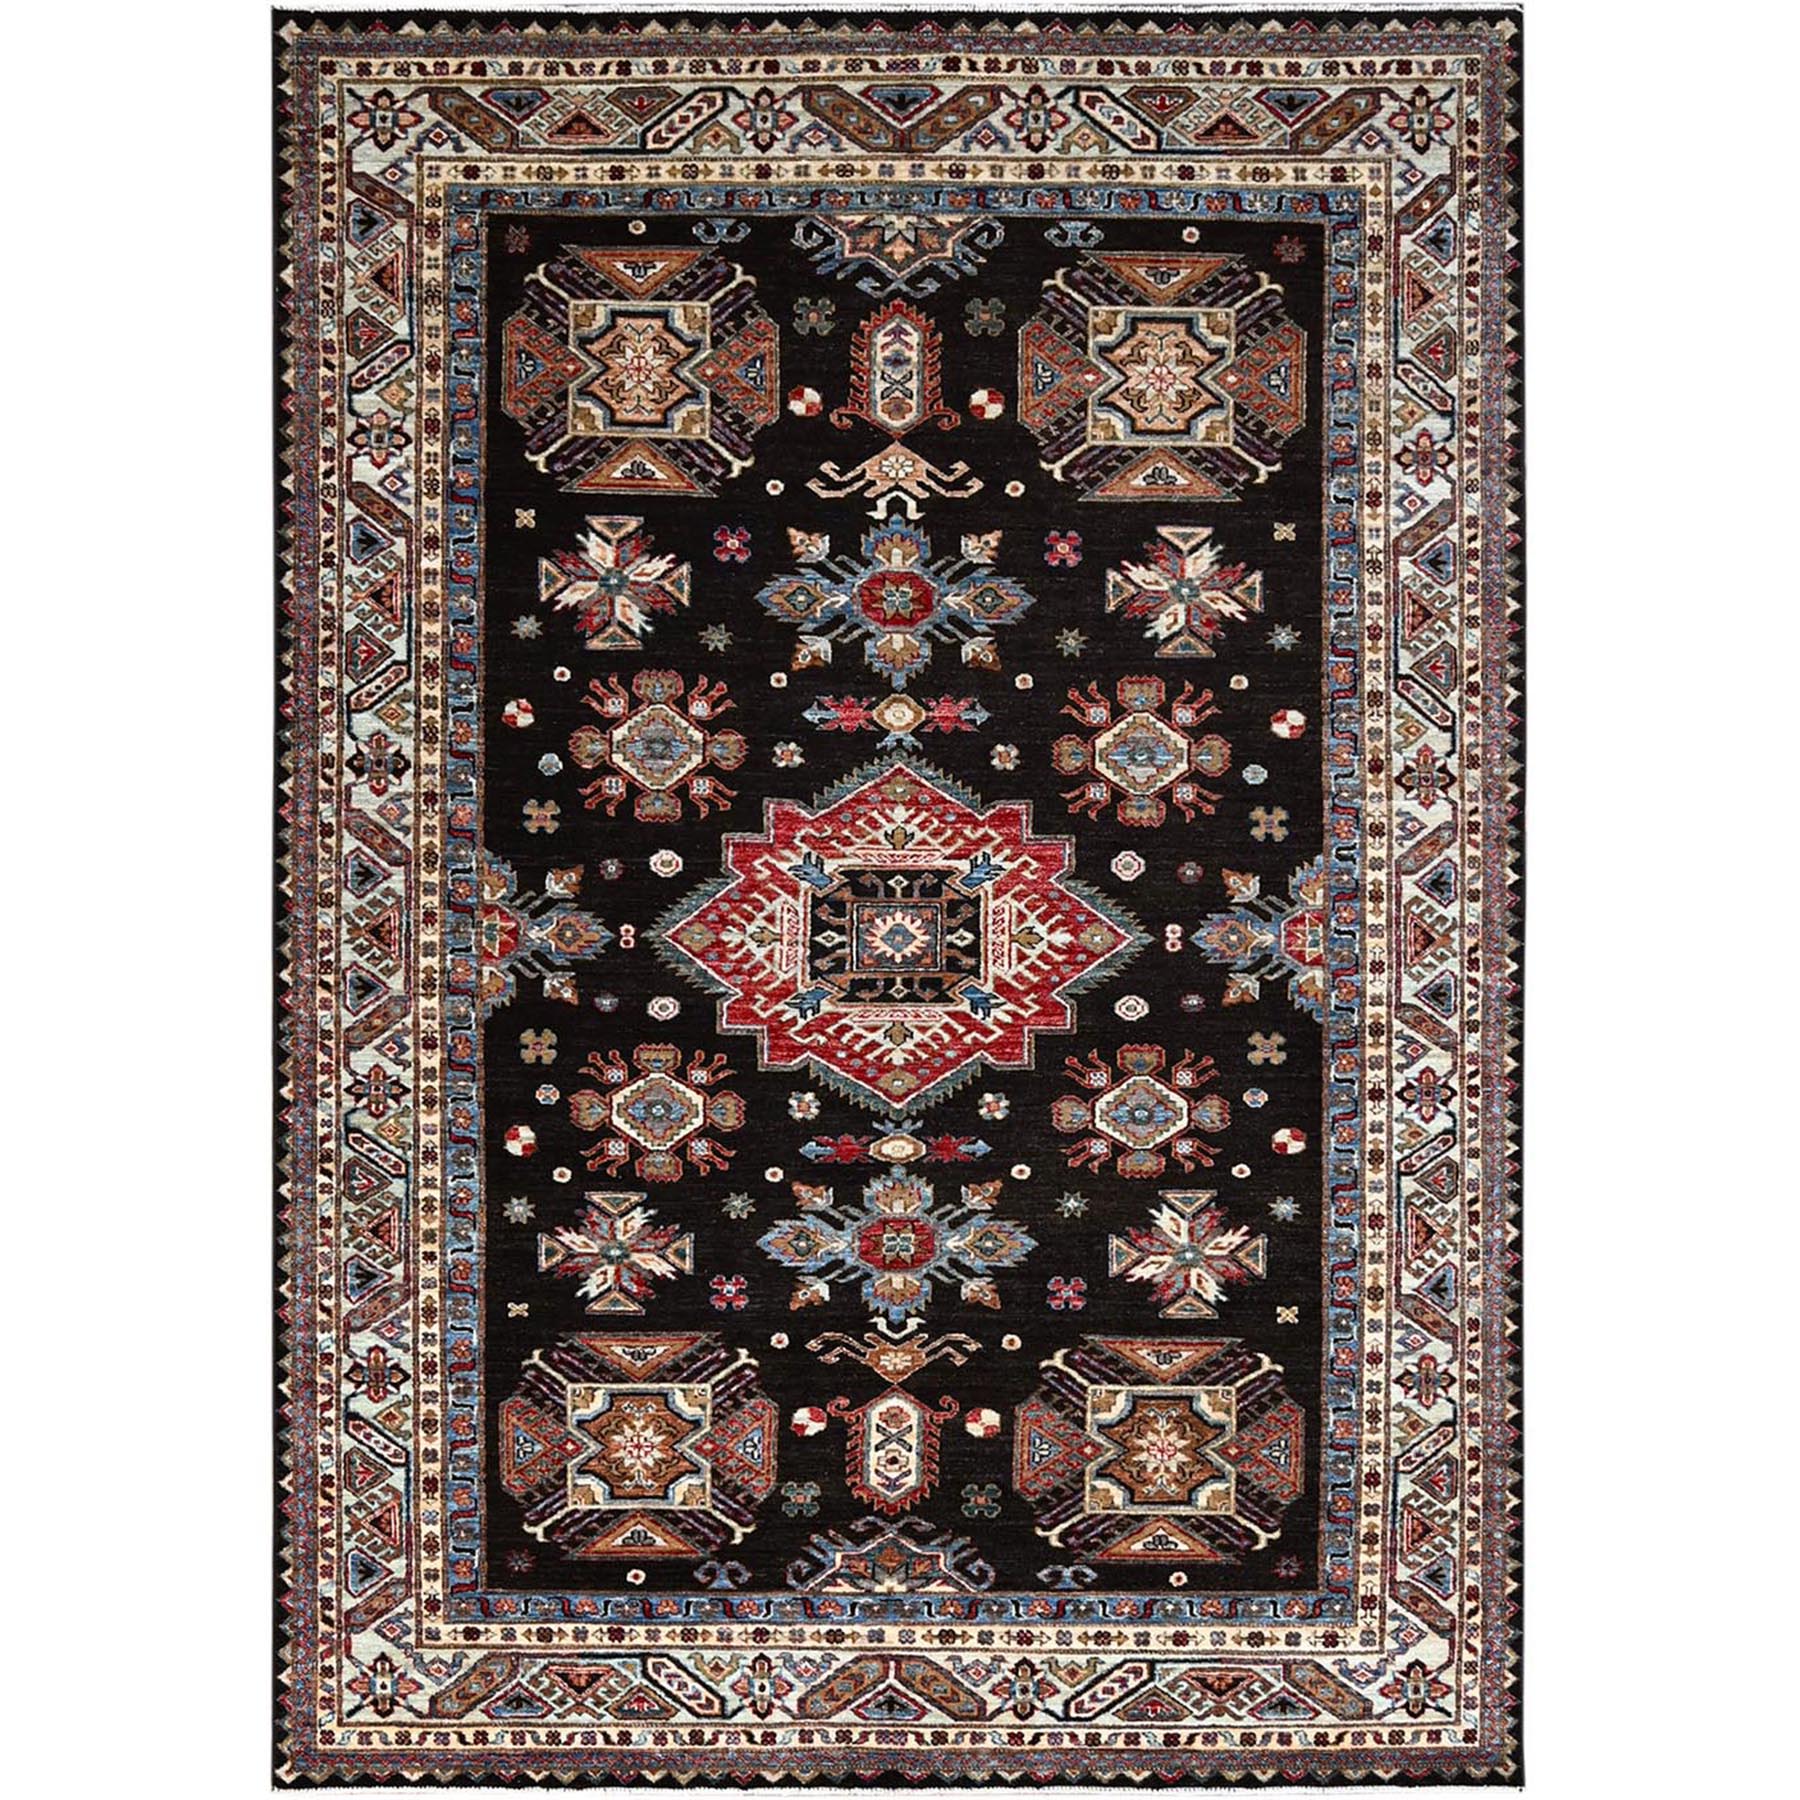 Pitch Black, Afghan Super Kazak, All Over Motifs Design, Vibrant Wool and Densely Woven, Hand Knotted Oriental Rug